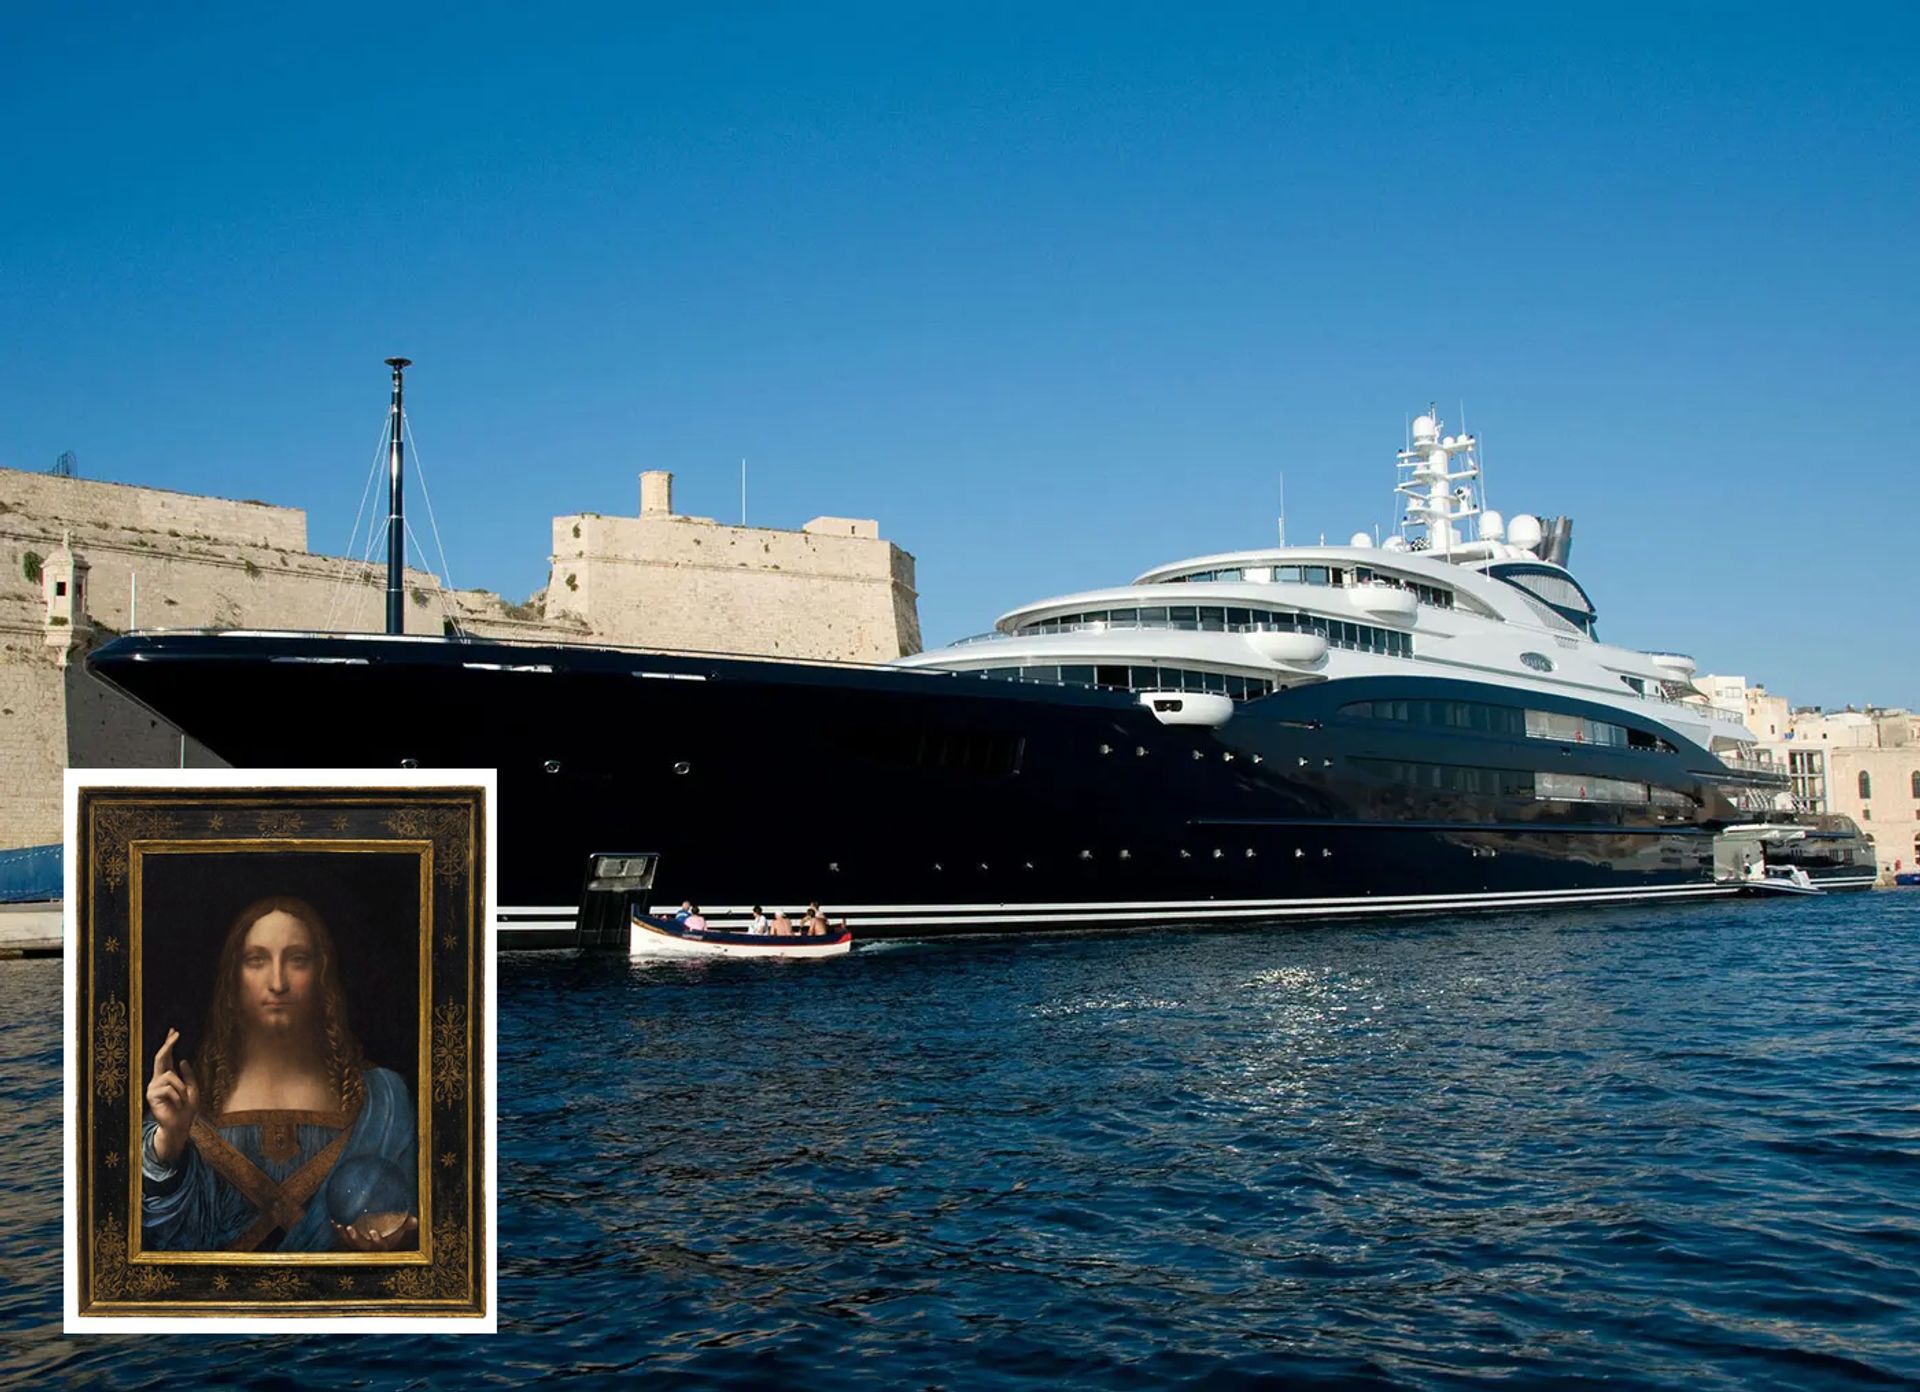 The Serene, a yacht belonging to Mohammed bin Salman. In 2019, The Art Newspaper speculated that the Serene might be delivering the Salvator Mundi (inset) to Paris. It was not. Yacht photo: Nick Wells/Ngw2009